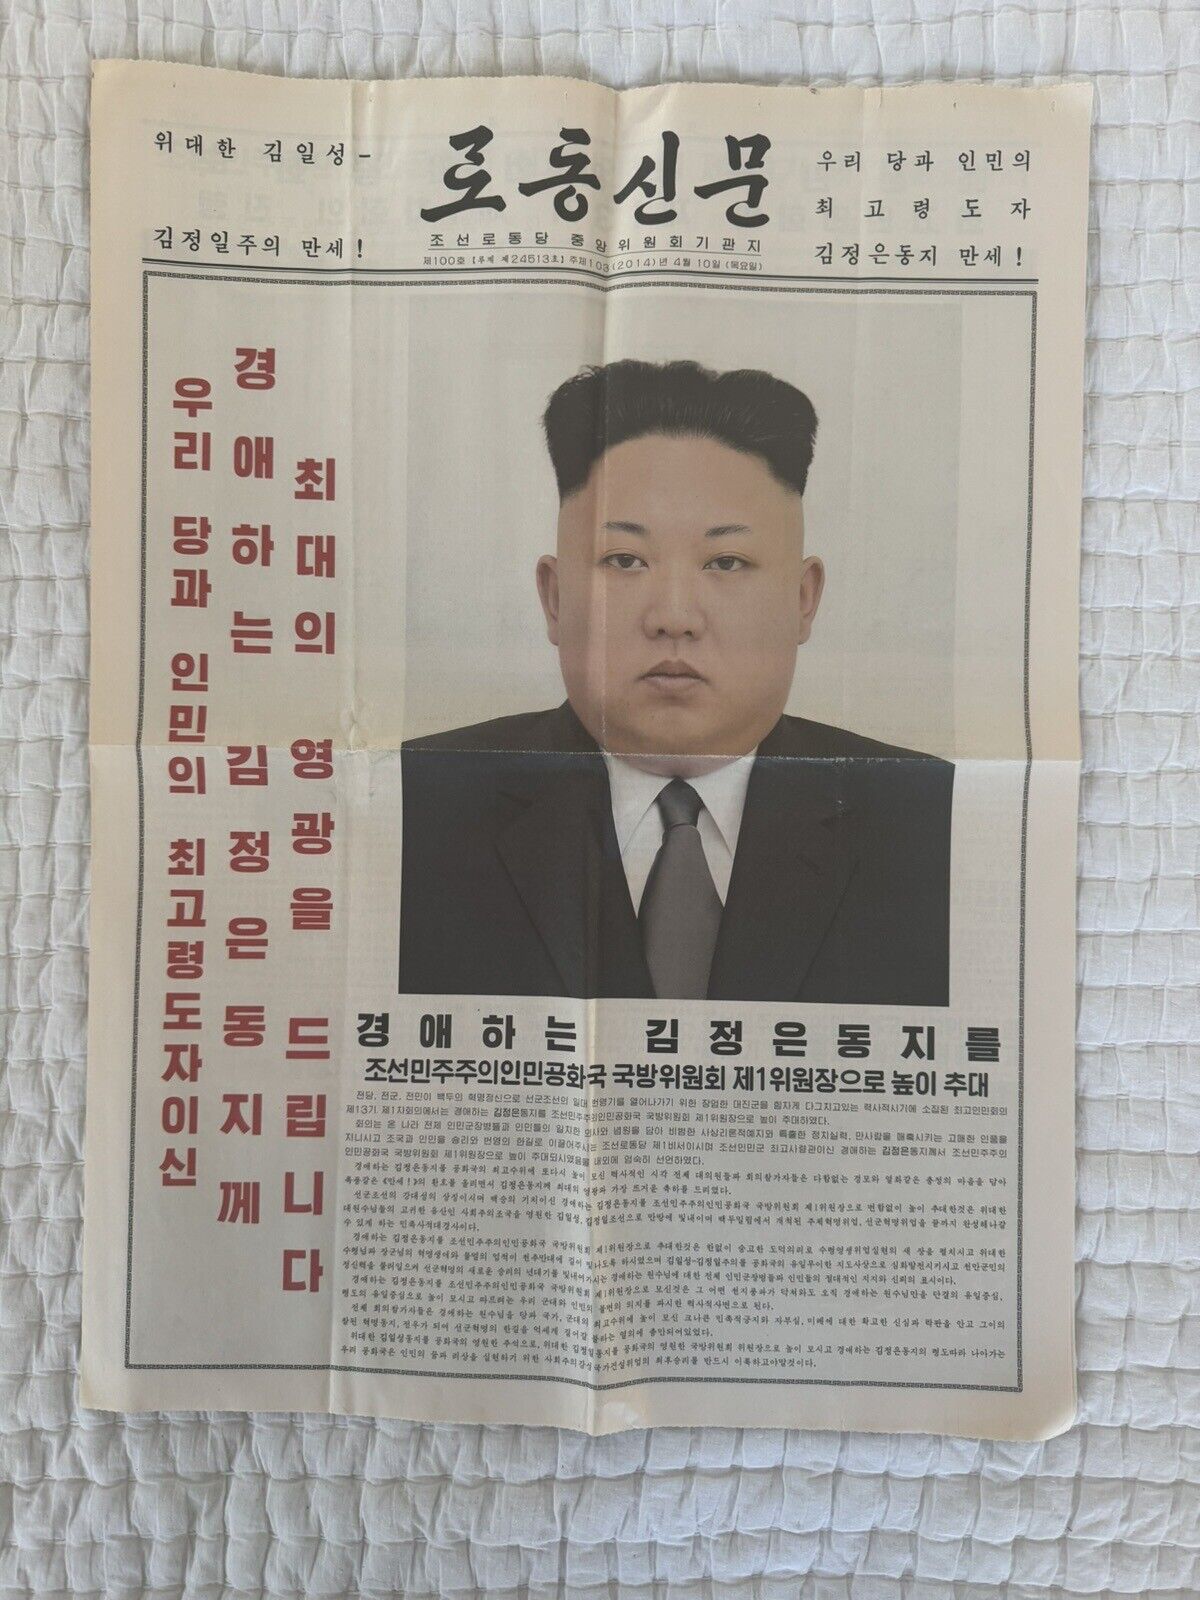 Rare 2014 North Korean newspaper featuring Kim Jong Un on the front page.